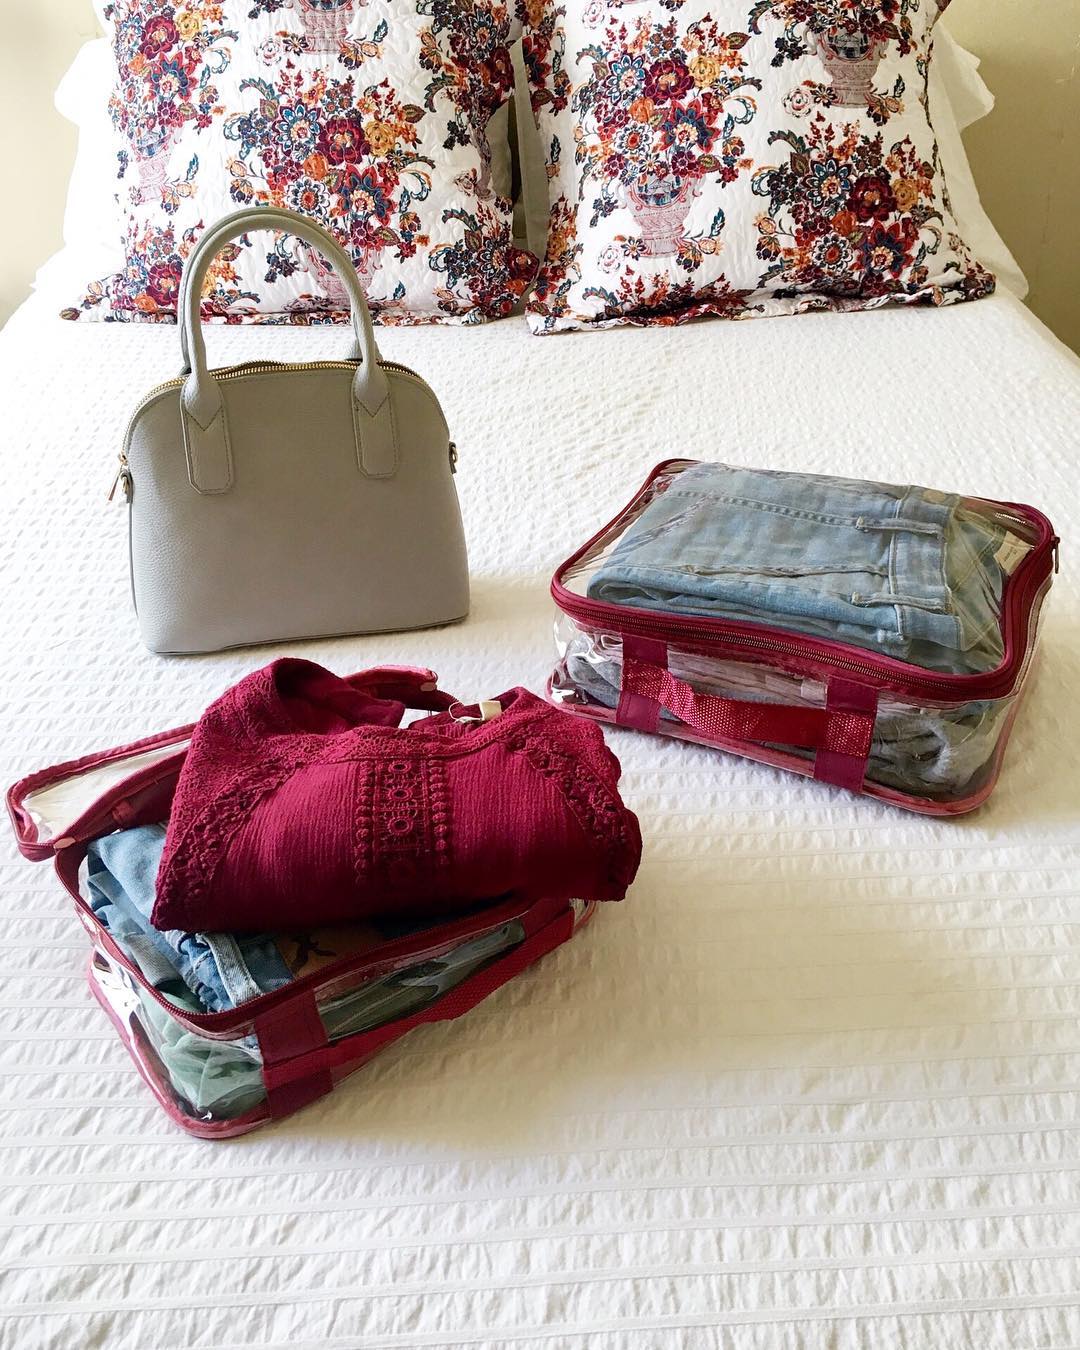 Clothes packed in burgundy cubes